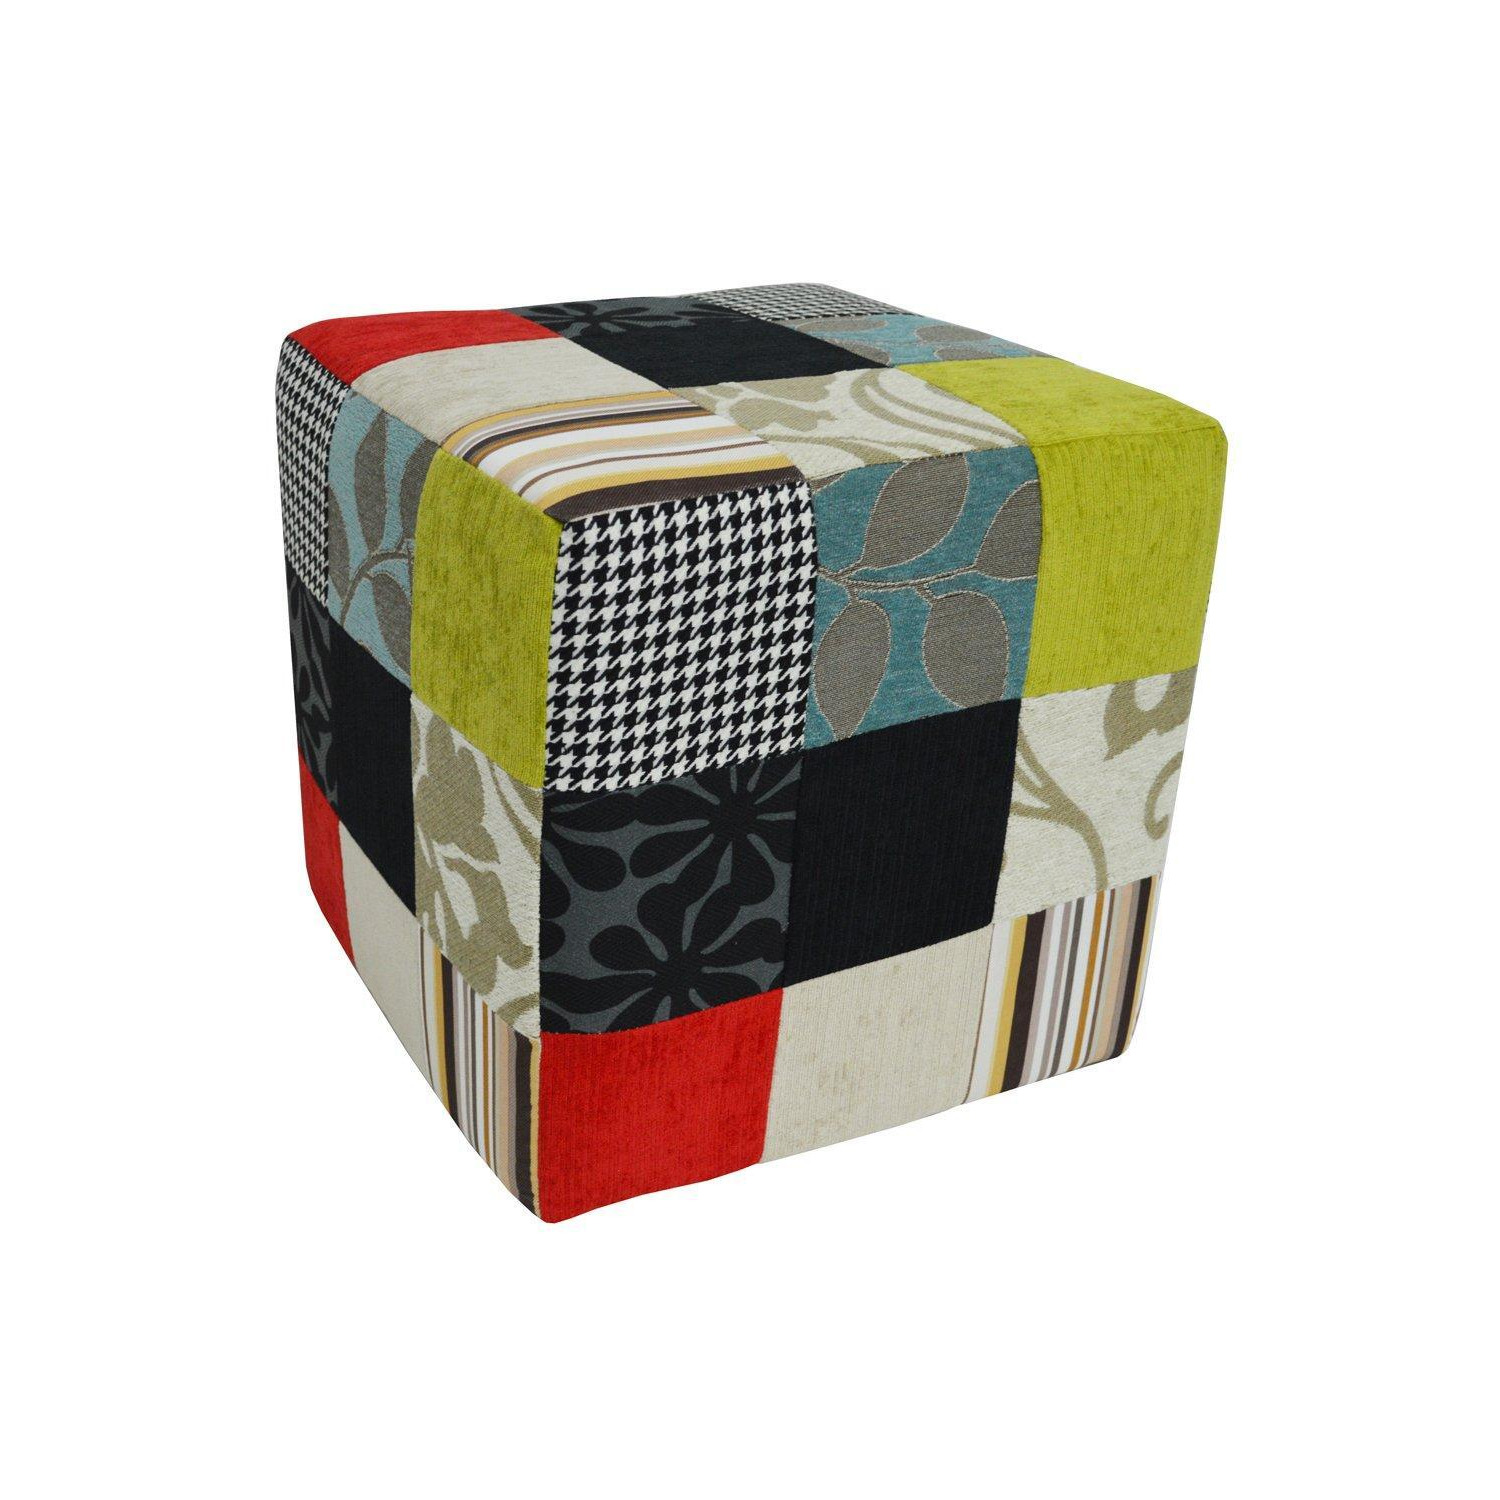 Plush Patchwork - Cube Stool  Pouffe - Blue  Green  Red - image 1